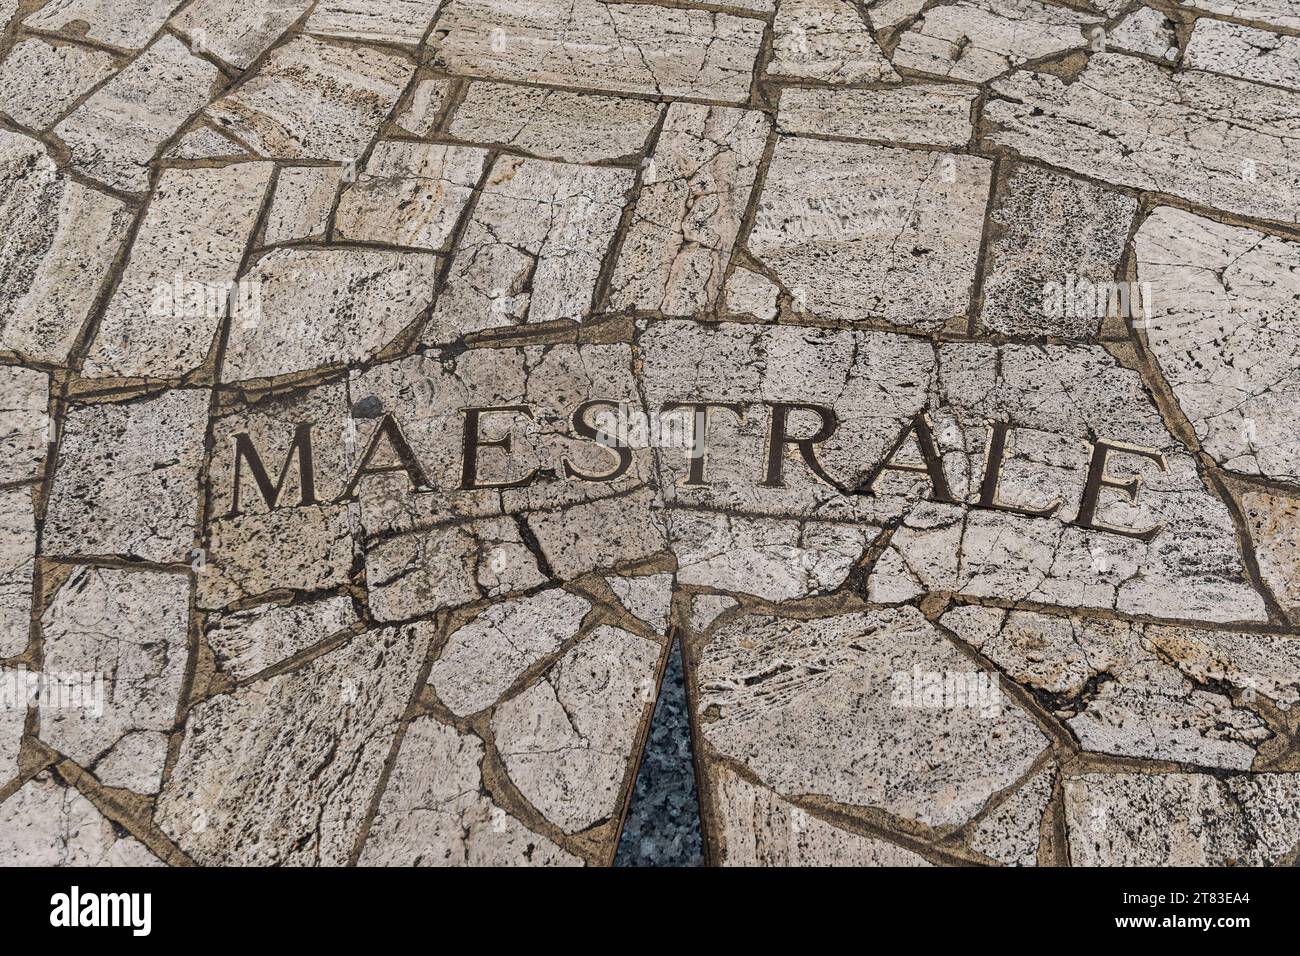 Detail of a compass rose with the direction of the Mistral, a French wind, on a mosaic floor, Finale Ligure, Savona, Liguria, Italy Stock Photo